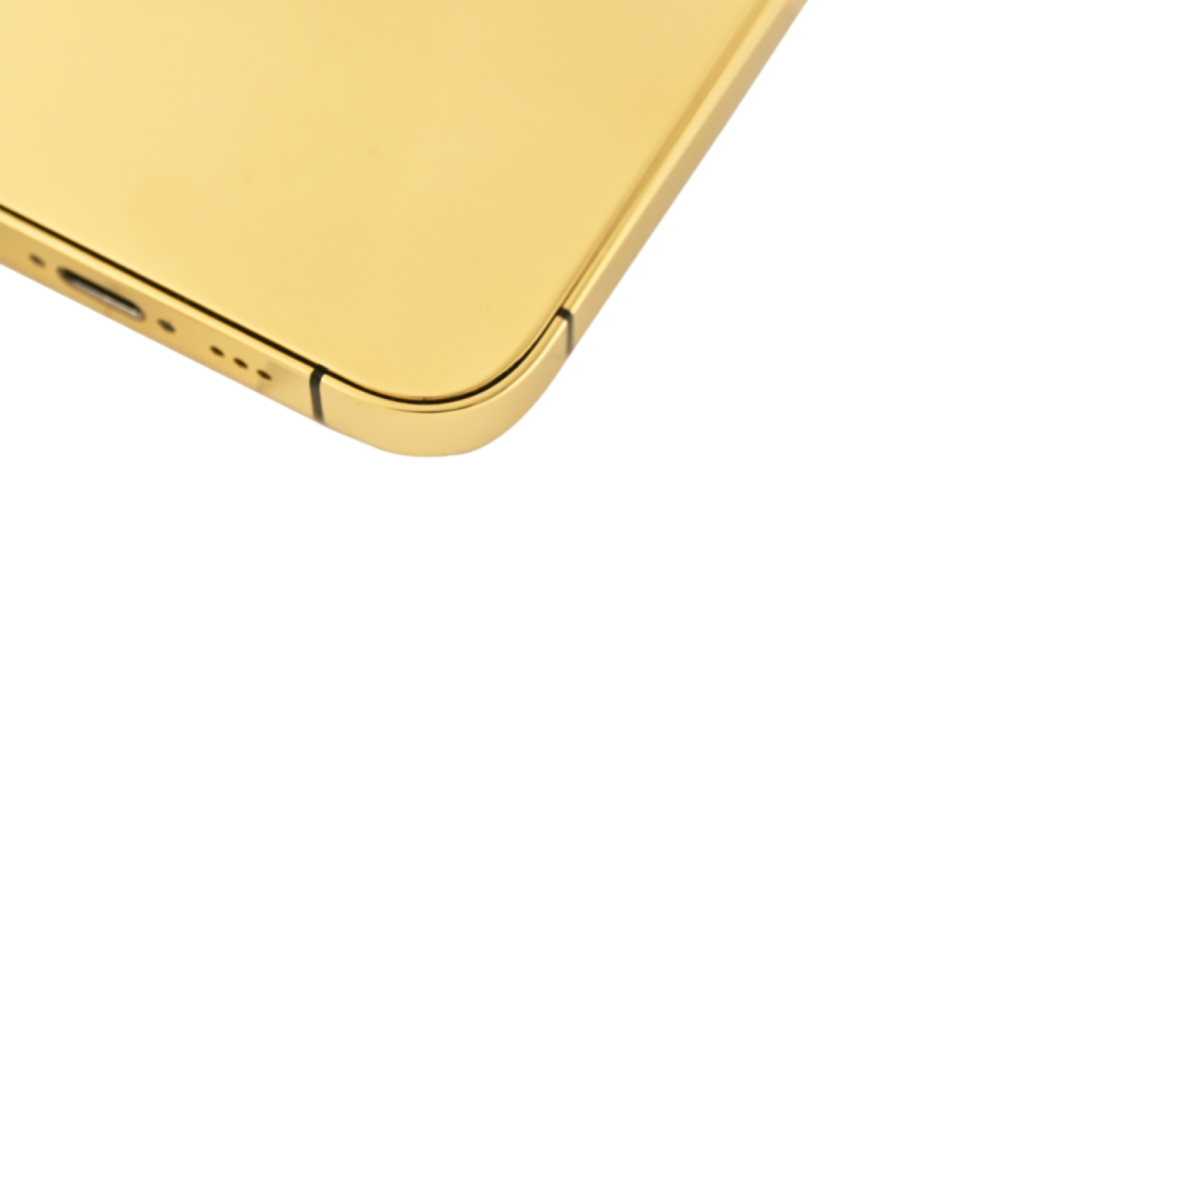 Caviar Luxury 24k Full Gold Customized iPhone 13 Pro 128 GB Limited Edition